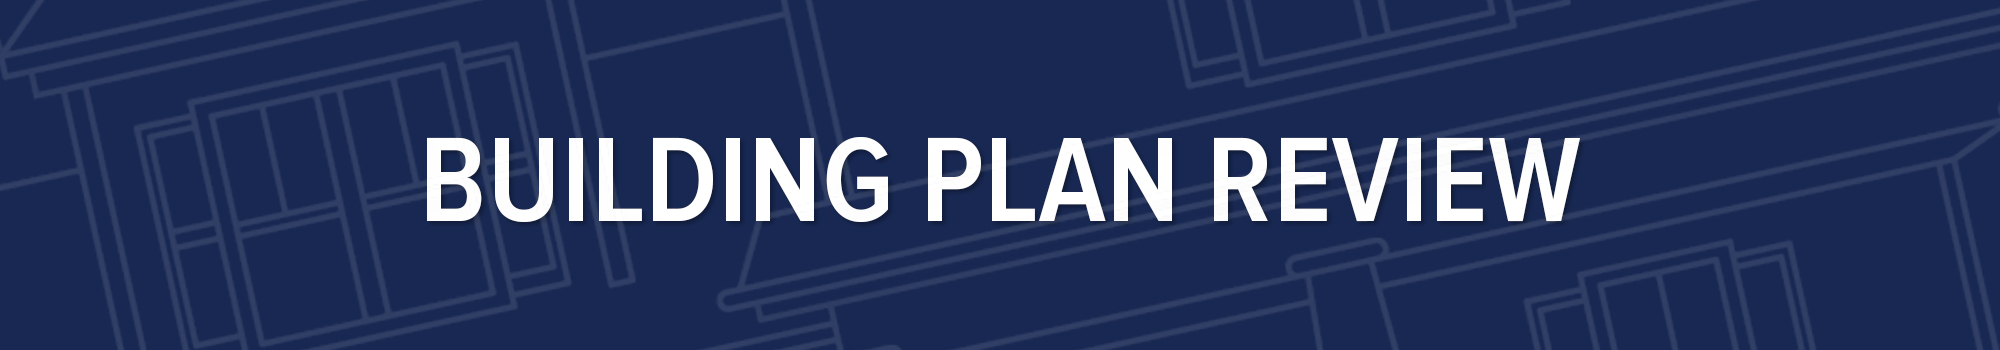 Building Plan Review Banner